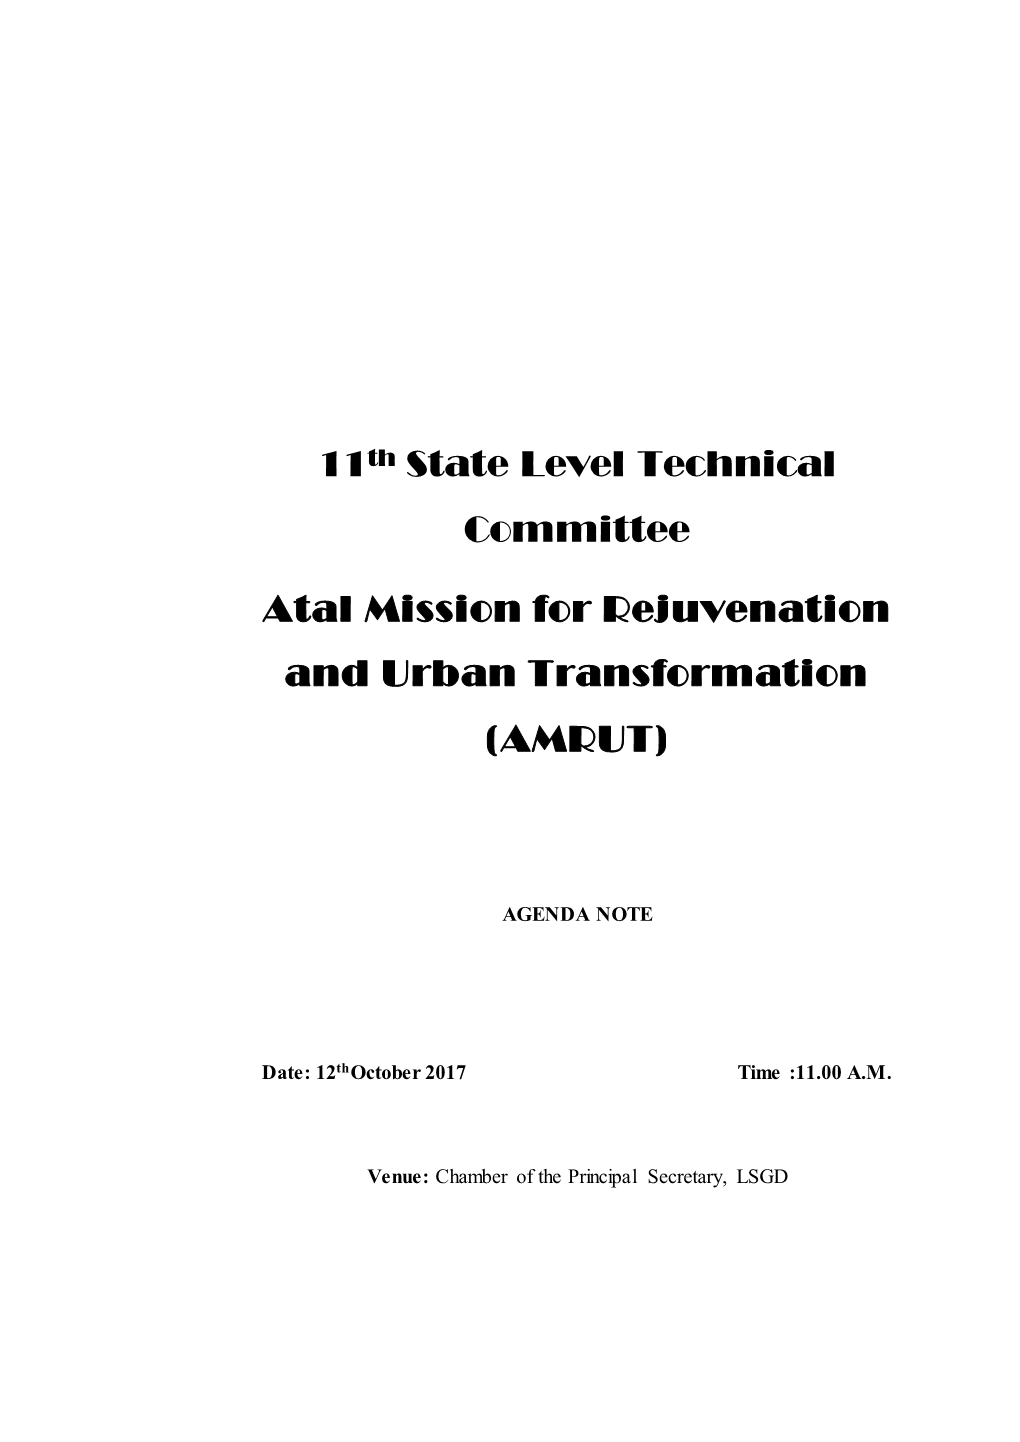 11Th State Level Technical Committee Atal Mission for Rejuvenation and Urban Transformation